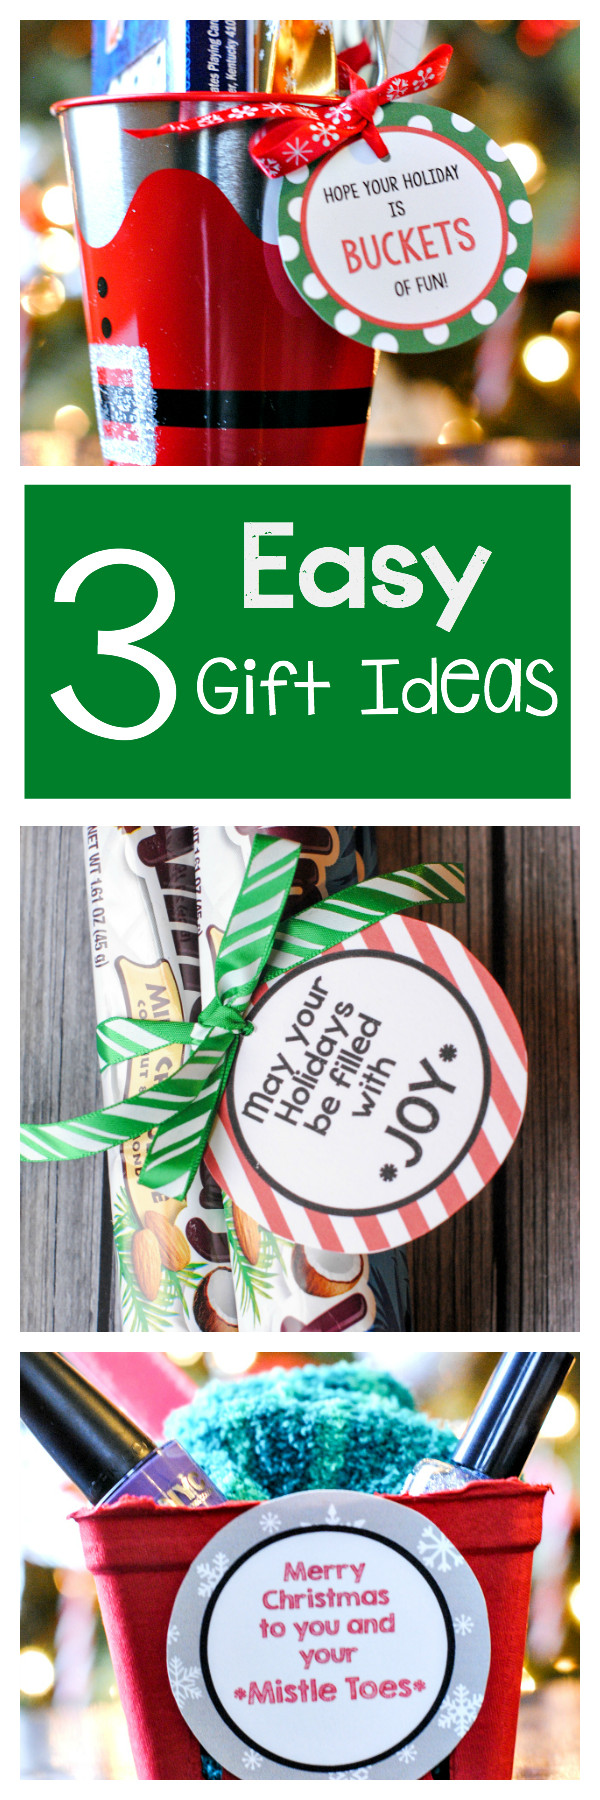 Holiday Gift Ideas For Coworkers
 3 Easy Gifts Ideas for Friends Crazy Little Projects